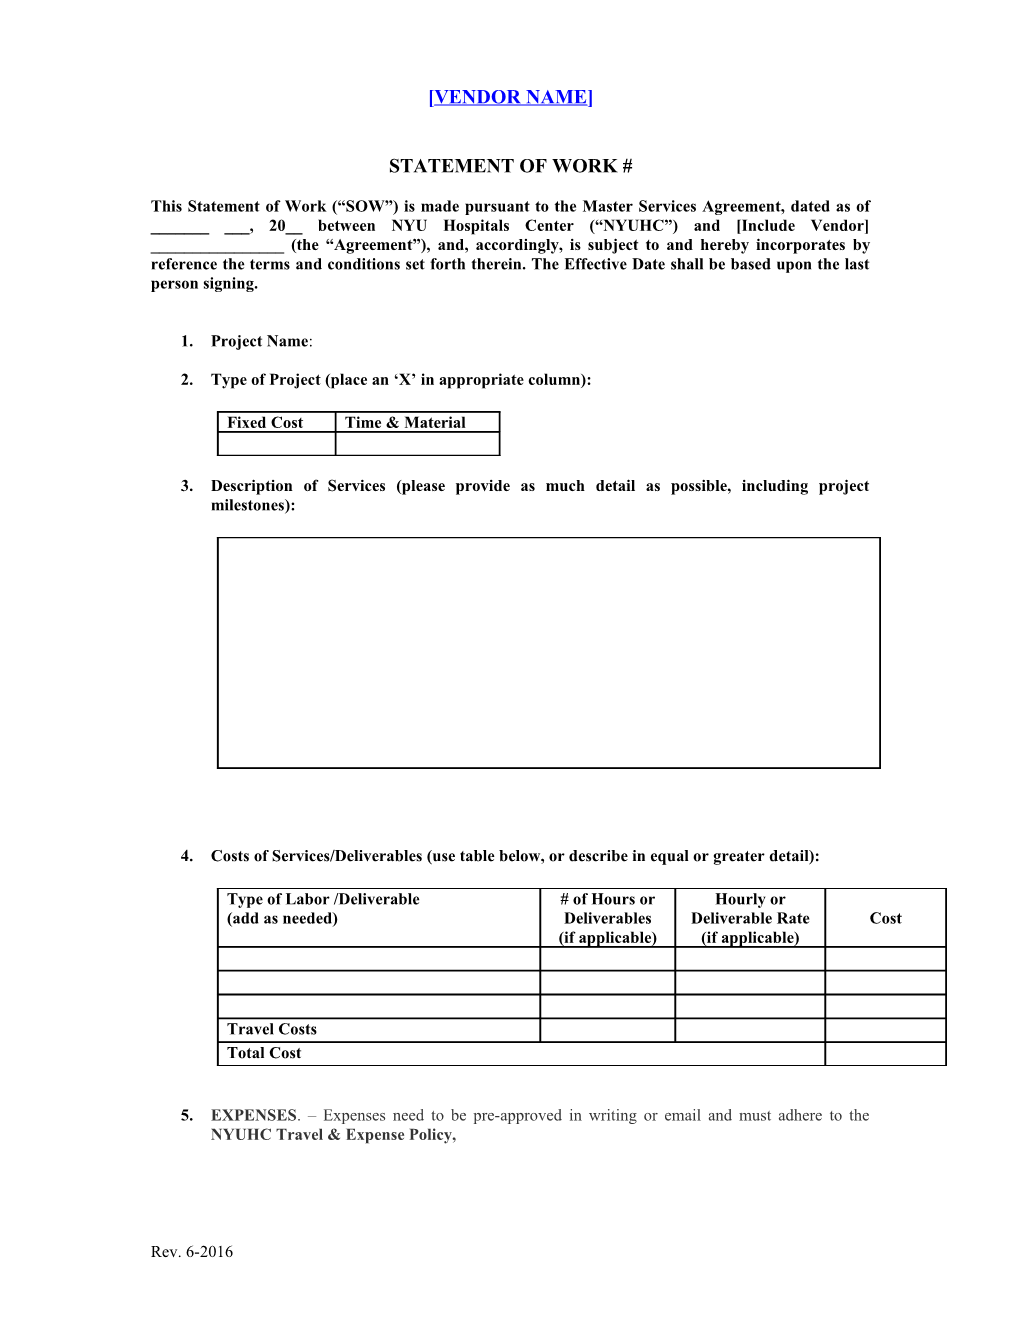 Statement of Work TEMPLATE